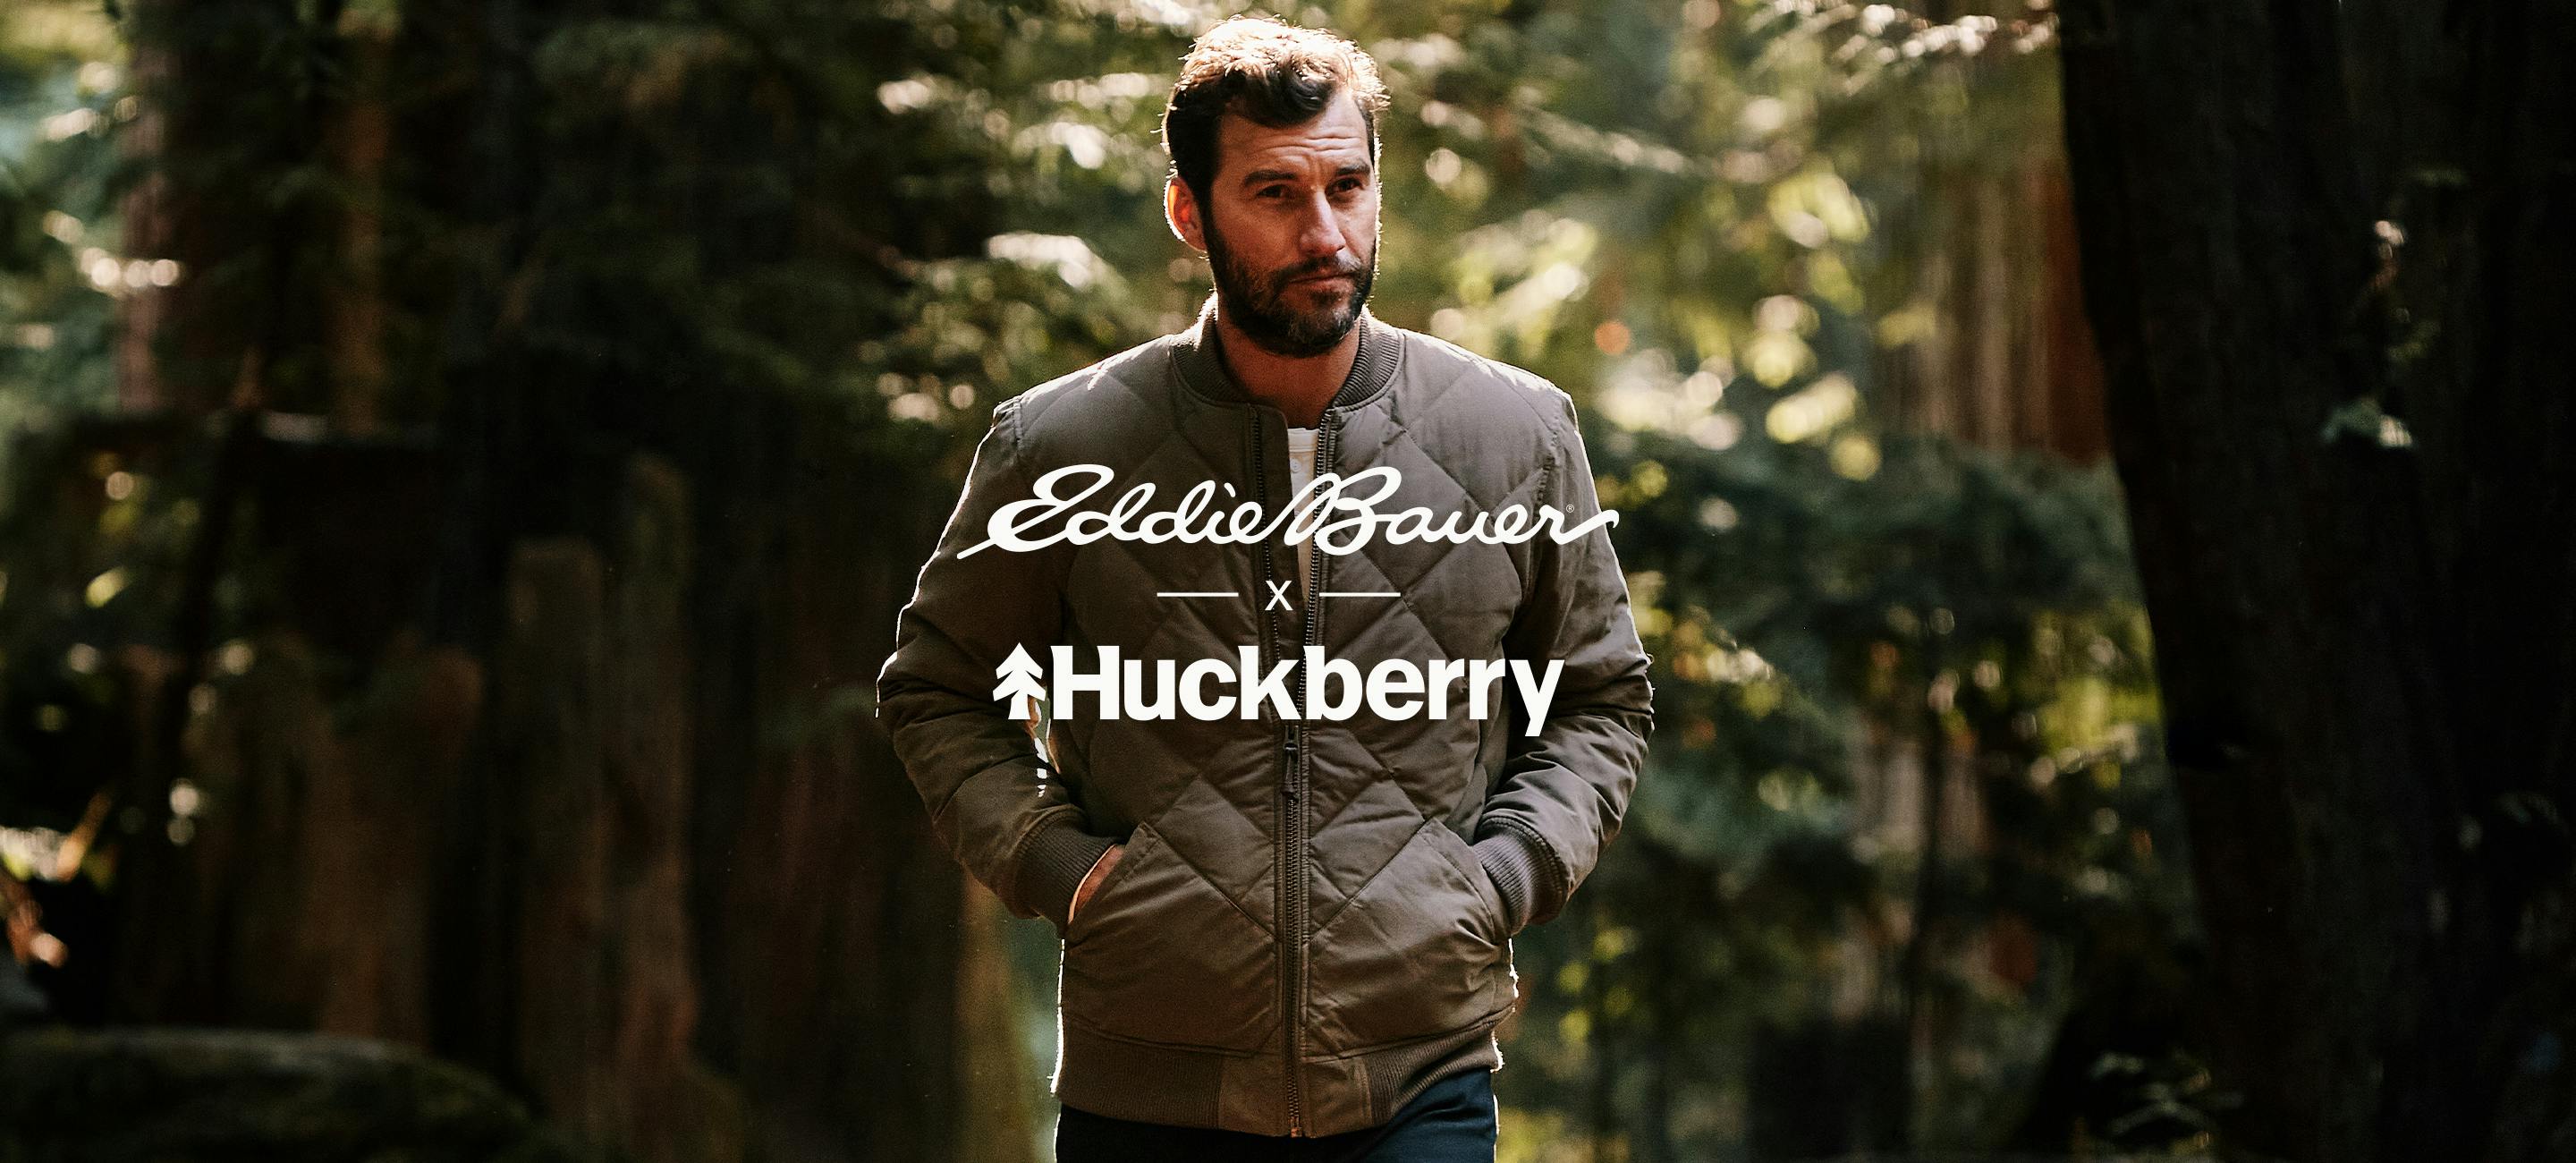 Man in Woods Wearing Jacket with Huckberry and Eddie Bauer logo on top